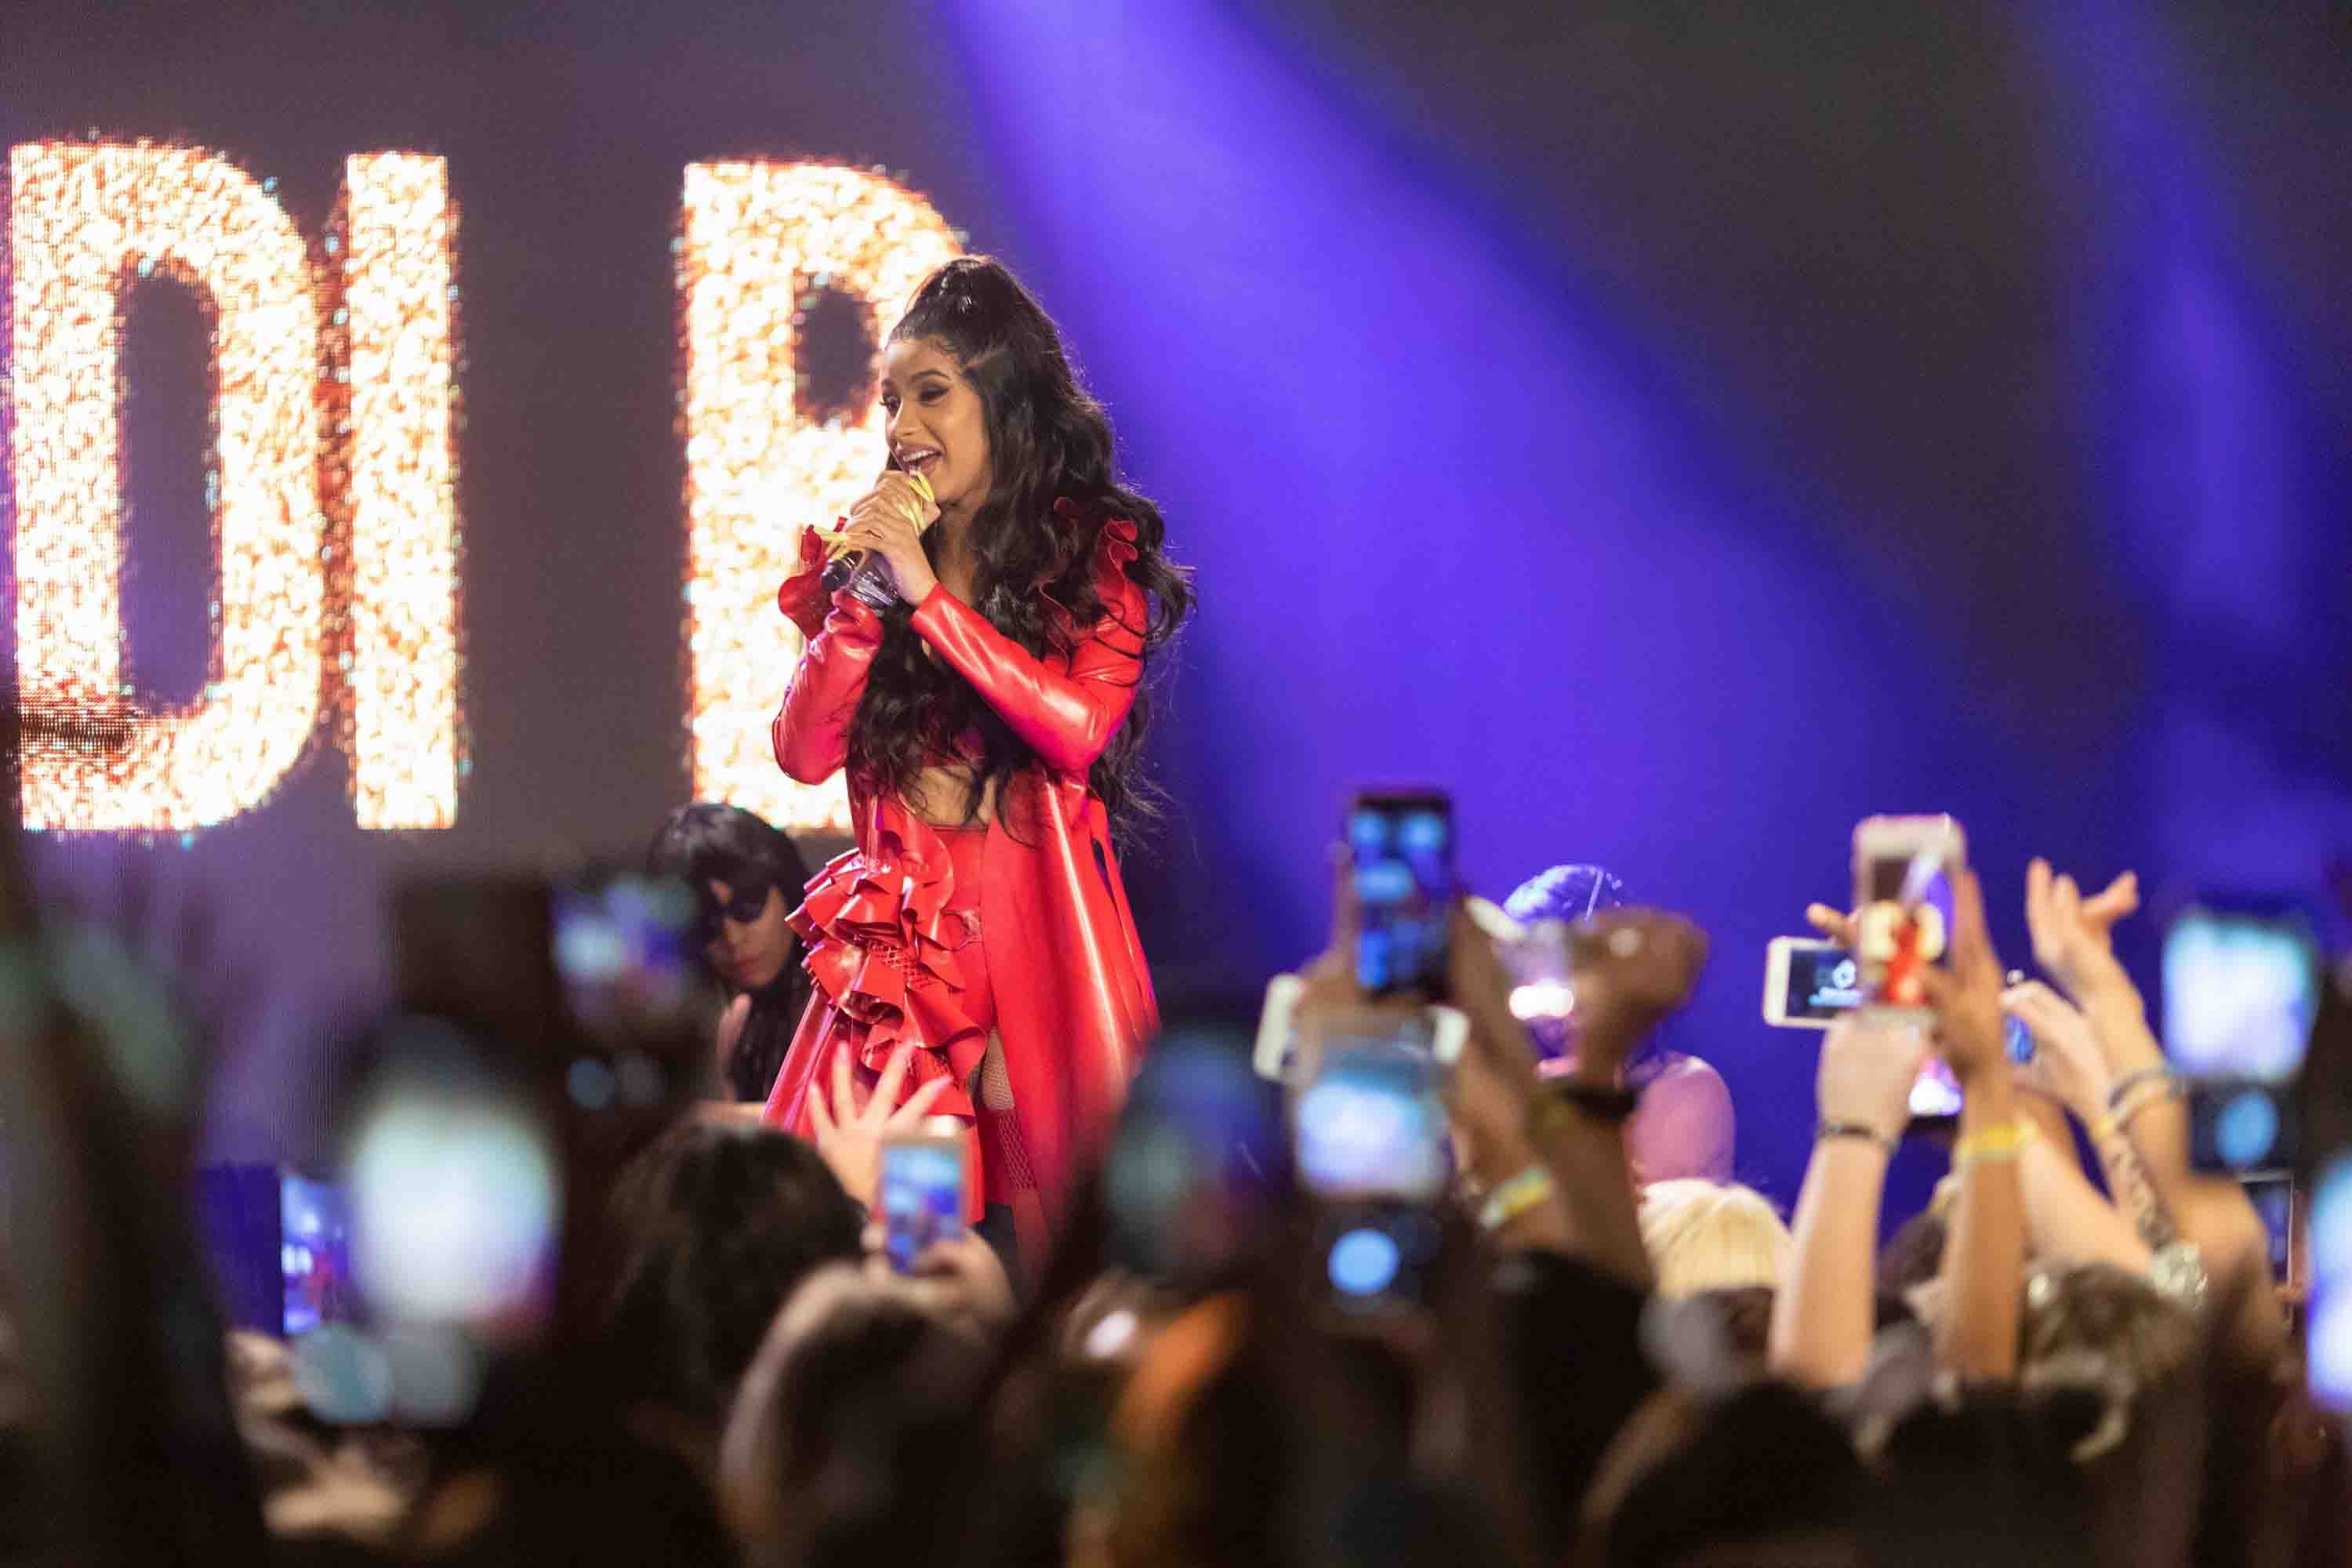 Musician, Cardi B, with dark, curly, long hair wearing a red top with matching high-waisted bottom with a red bow-like flourishment and a red glossy outer trenchcoat holding a microphone up to her open mouth on stage in front of an audience with fans recording her on their mobile phones